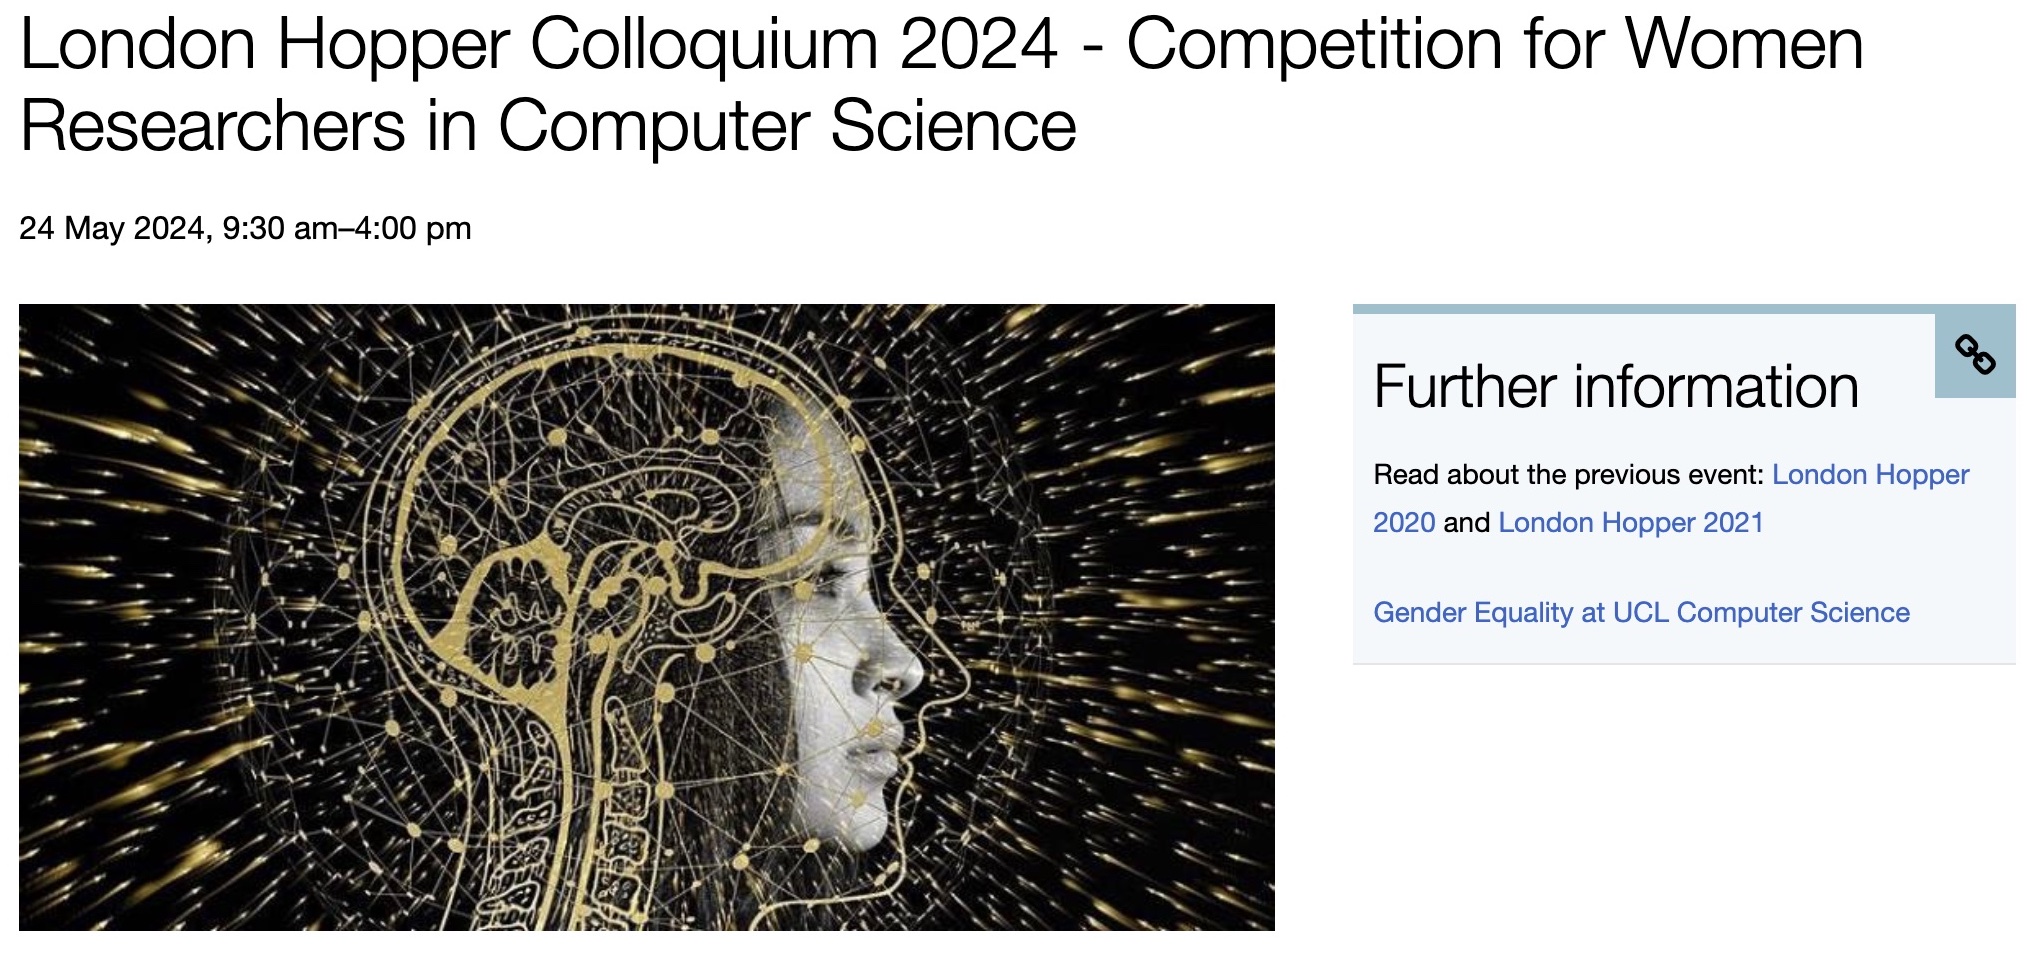 London Hopper Colloquium is a competitive event for women academic researchers across the UK, building a career in computer science, to showcase their research and hear from other successful women in this field.